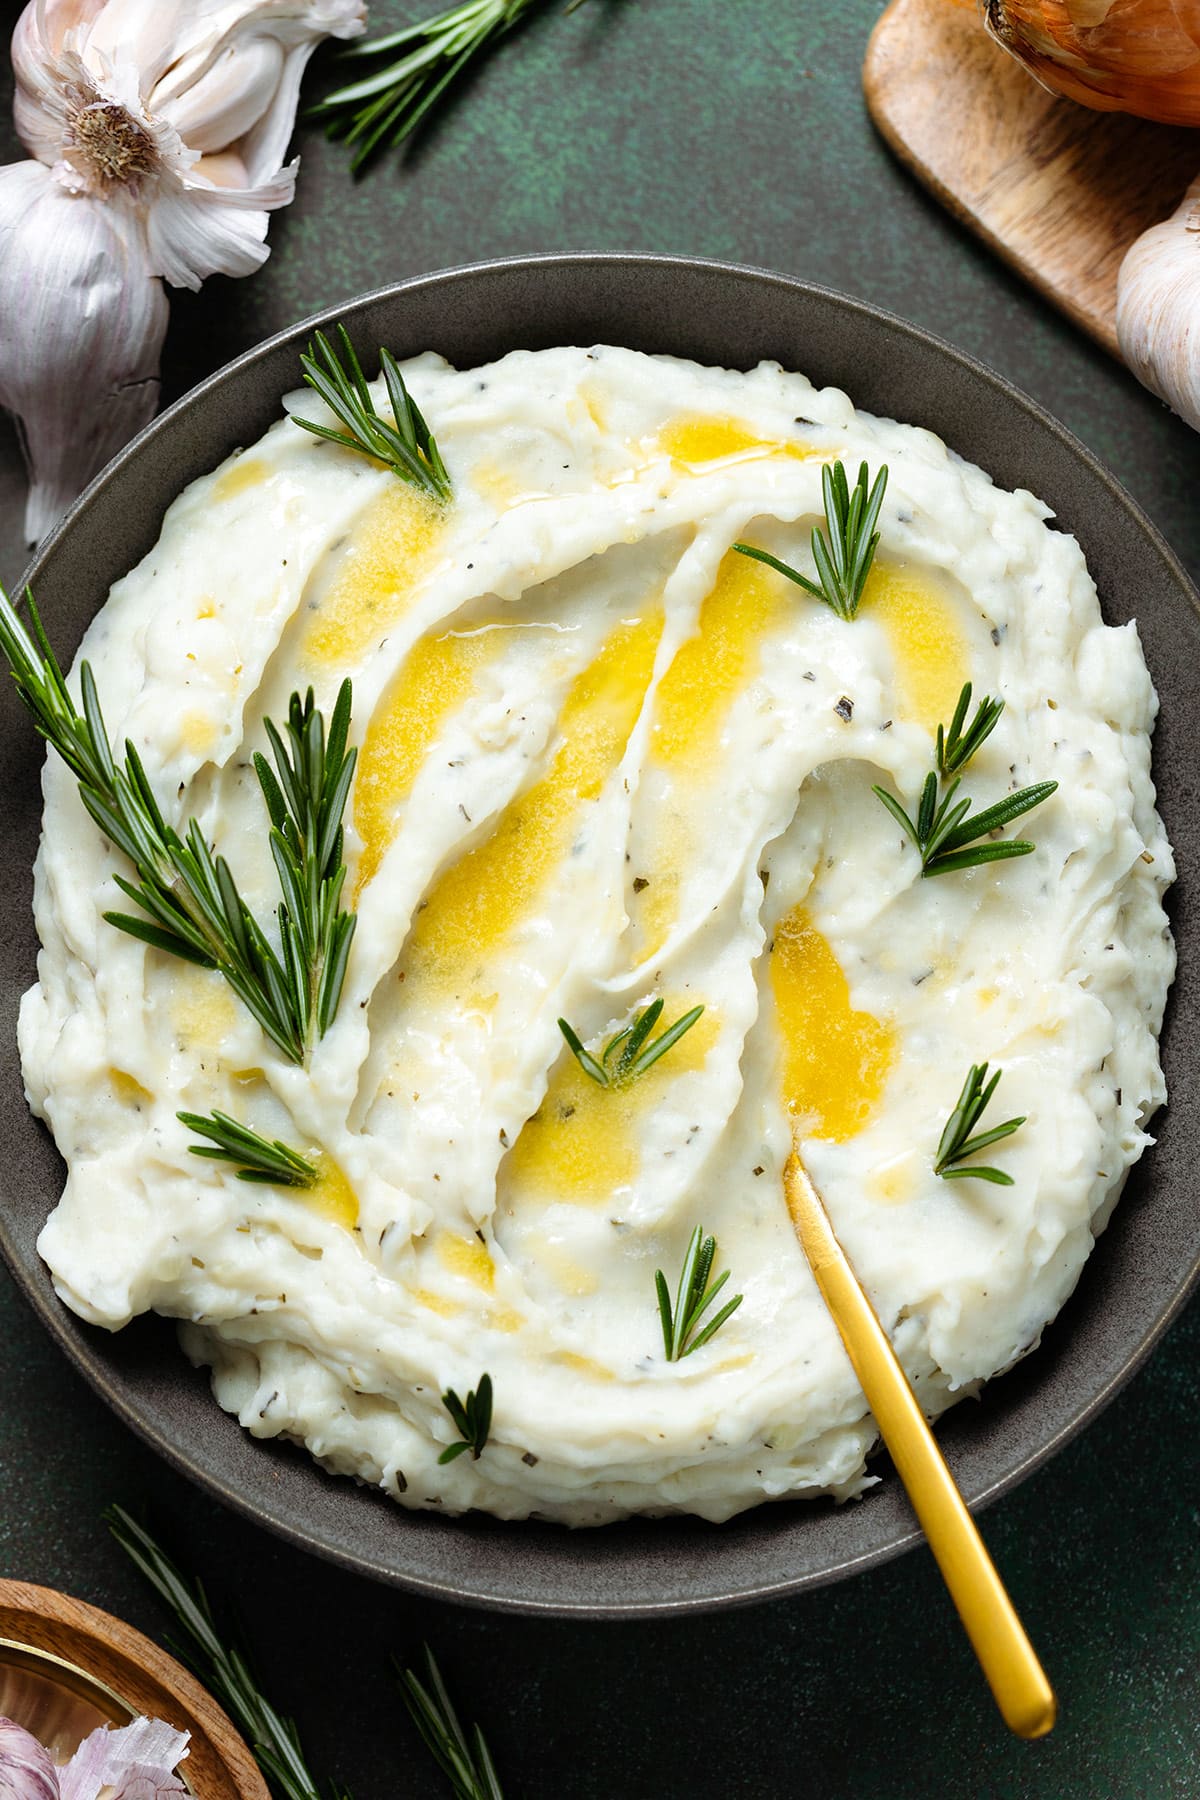 Mashed potatoes with fresh rosemary and melted butter in a black bowl with a gold spoon on the right side.